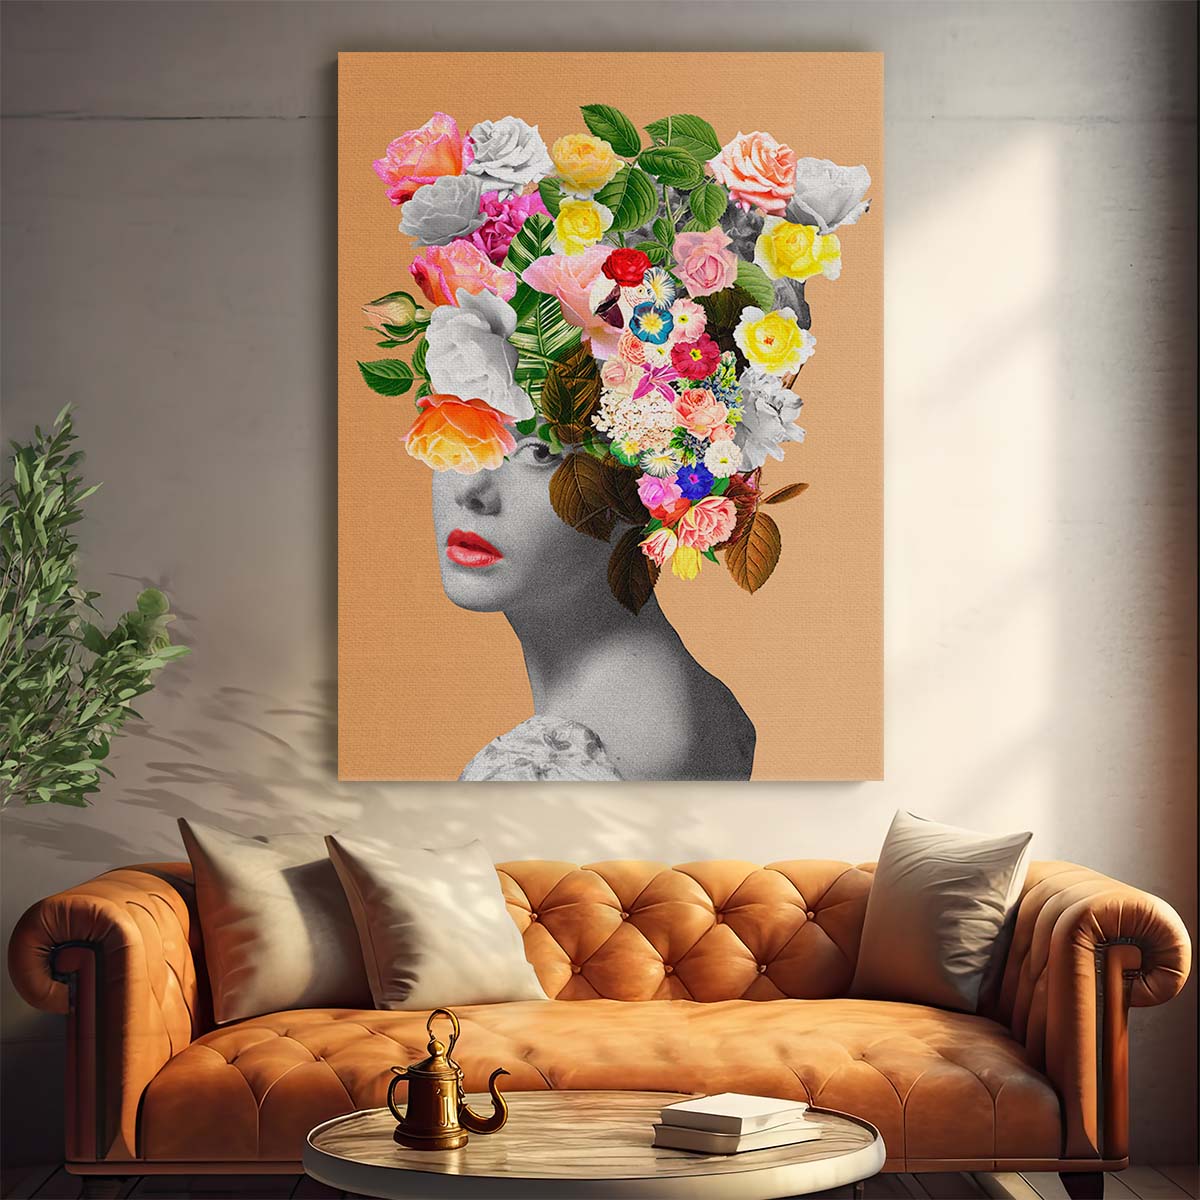 Colorful Botanical Woman Portrait in Surrealistic Floral Collage Photography by Luxuriance Designs, made in USA